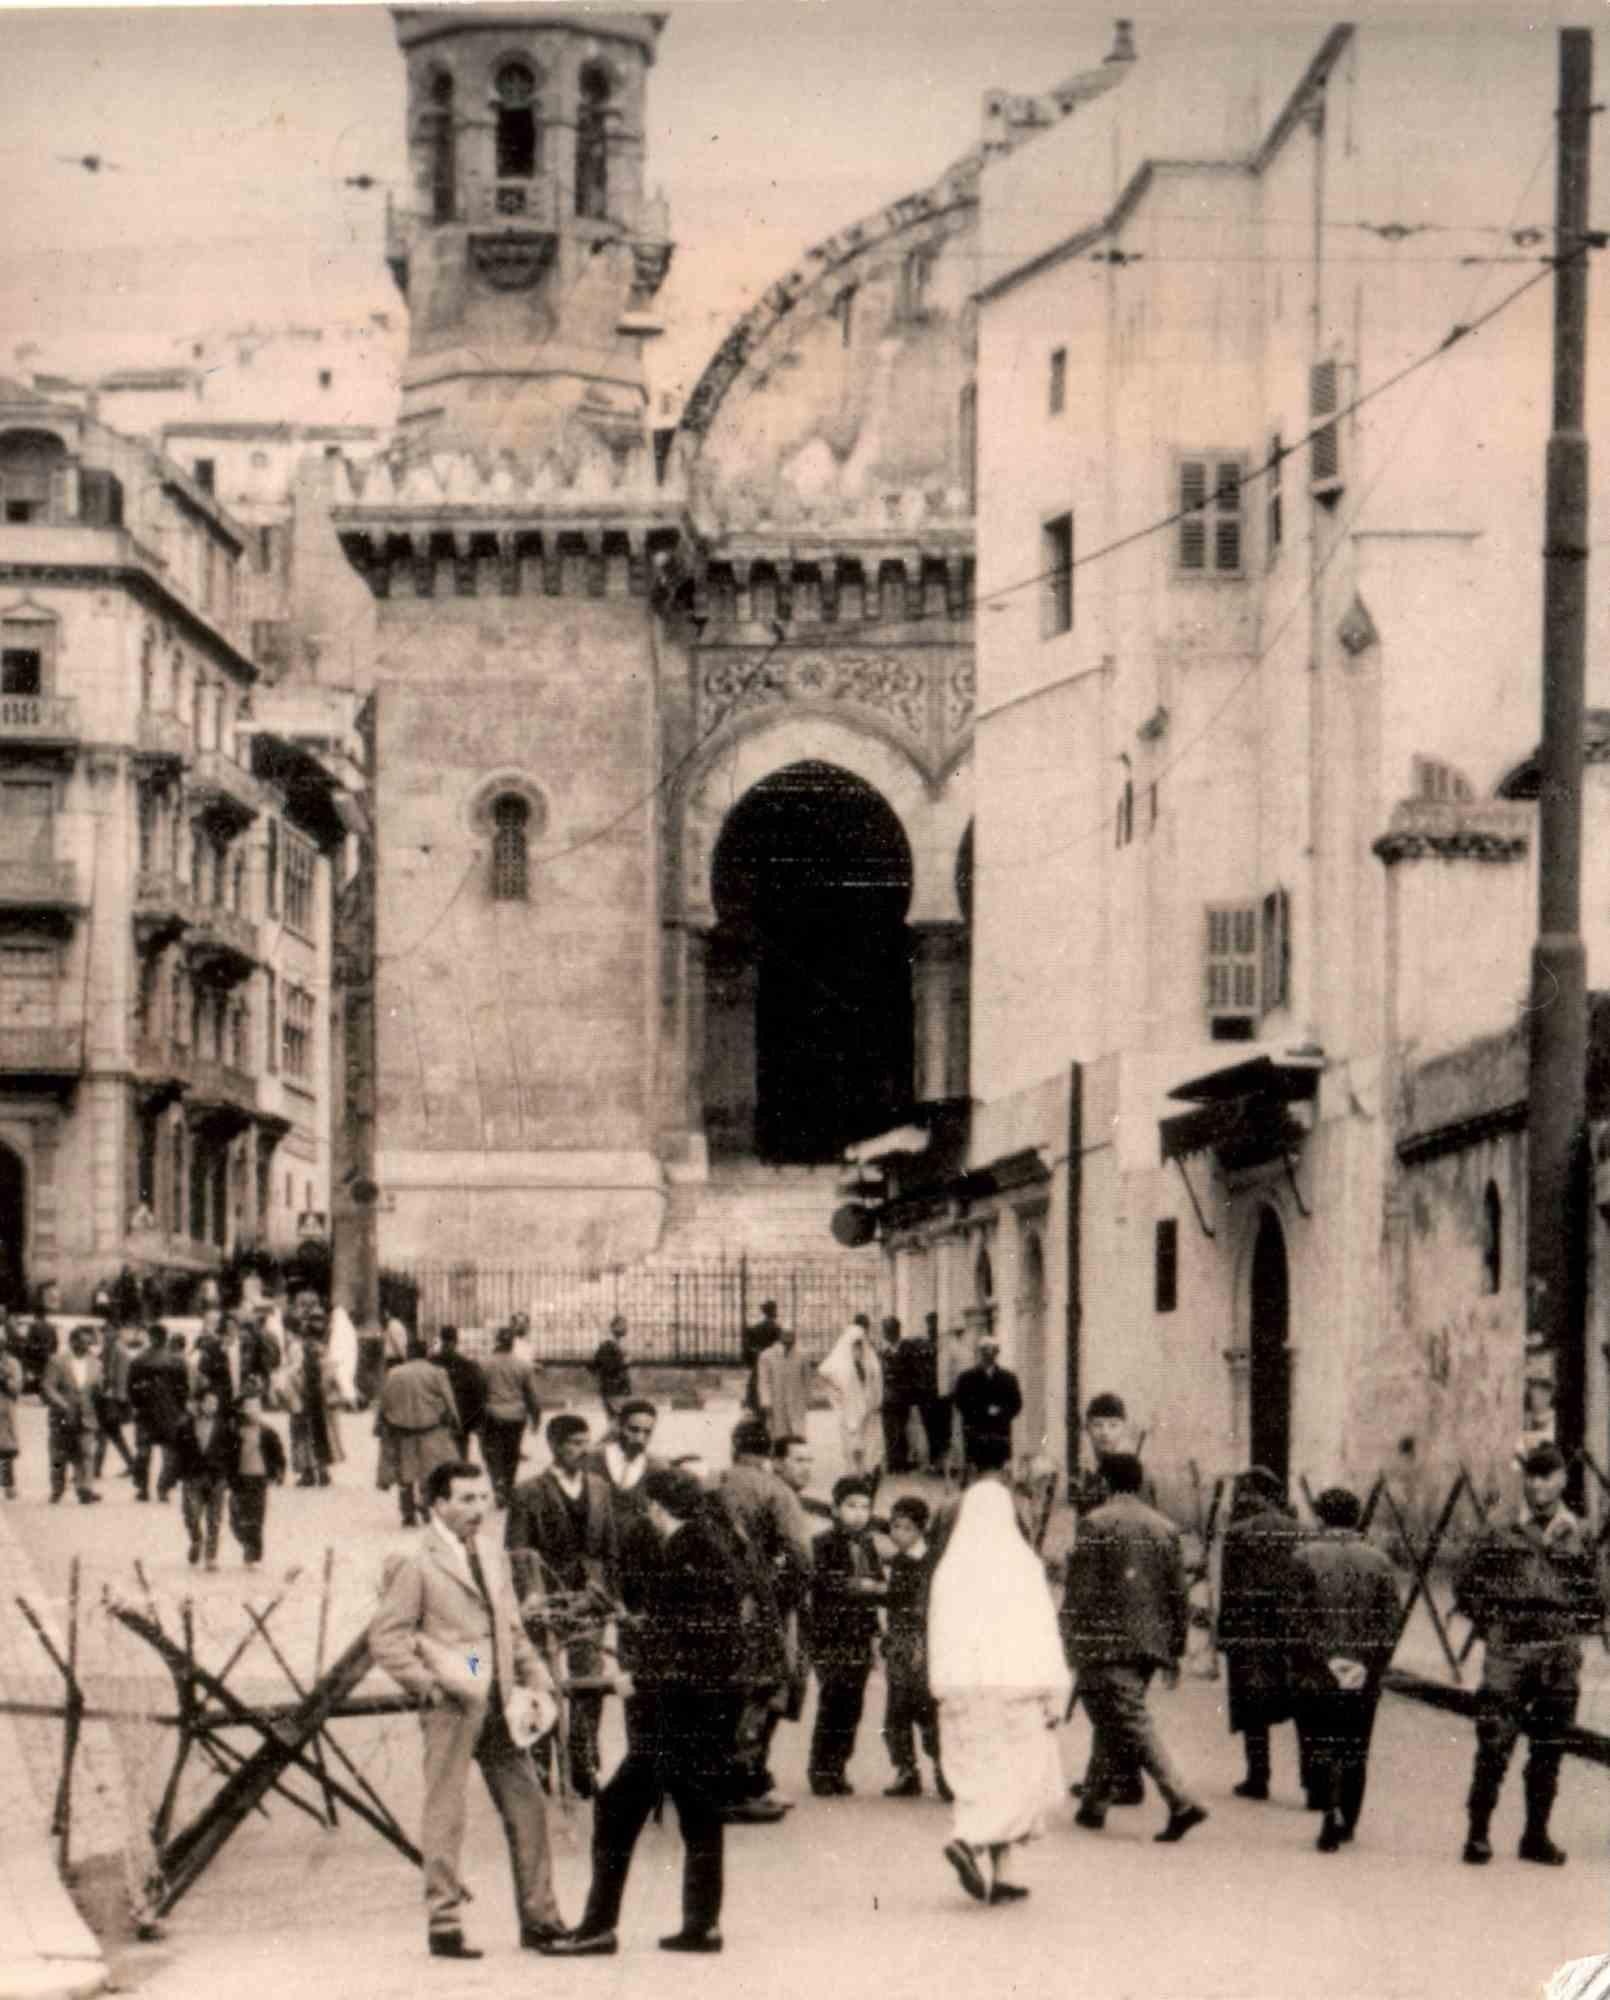 Unknown Black and White Photograph - Algeria, historical photograph - Mid-20 Century